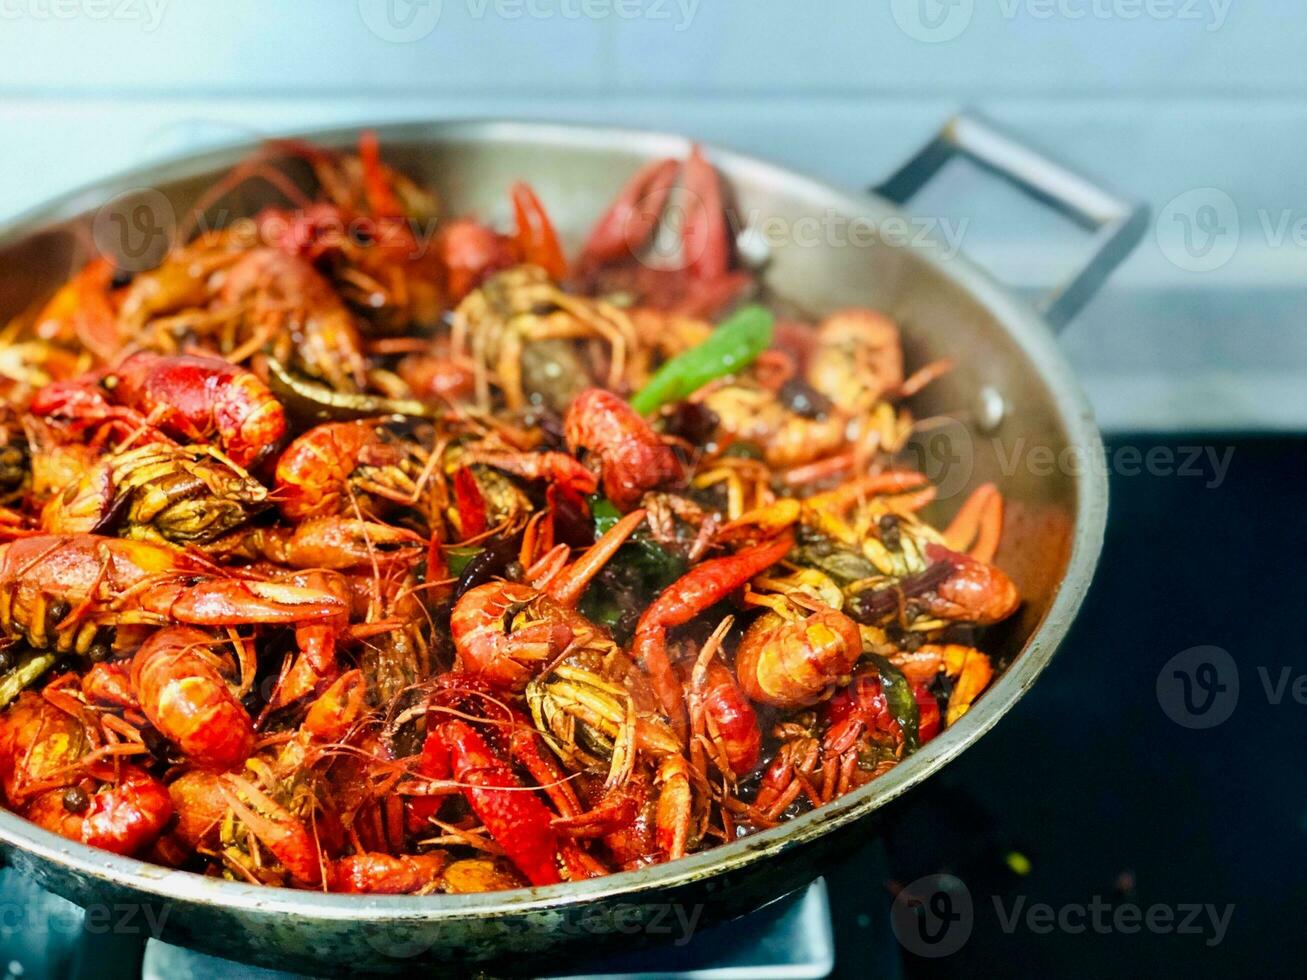 Fried crayfish in a pan on the stove, Thailand. photo